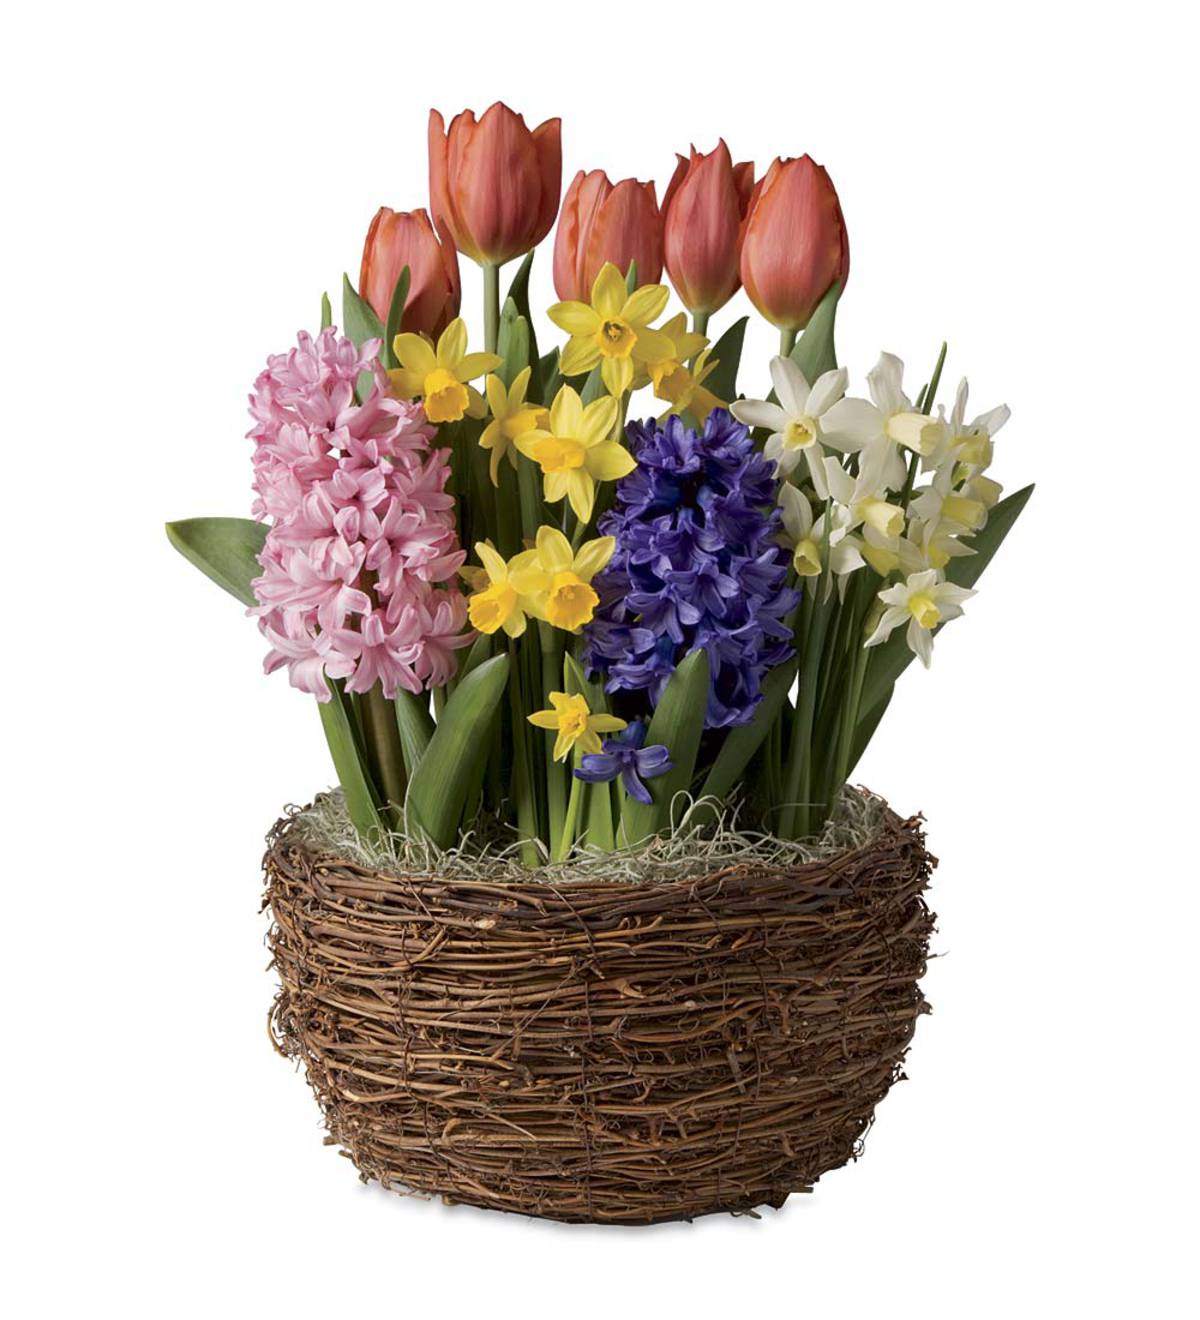 Tulips and Narcissus Bulb Garden - Ships January-June 2020